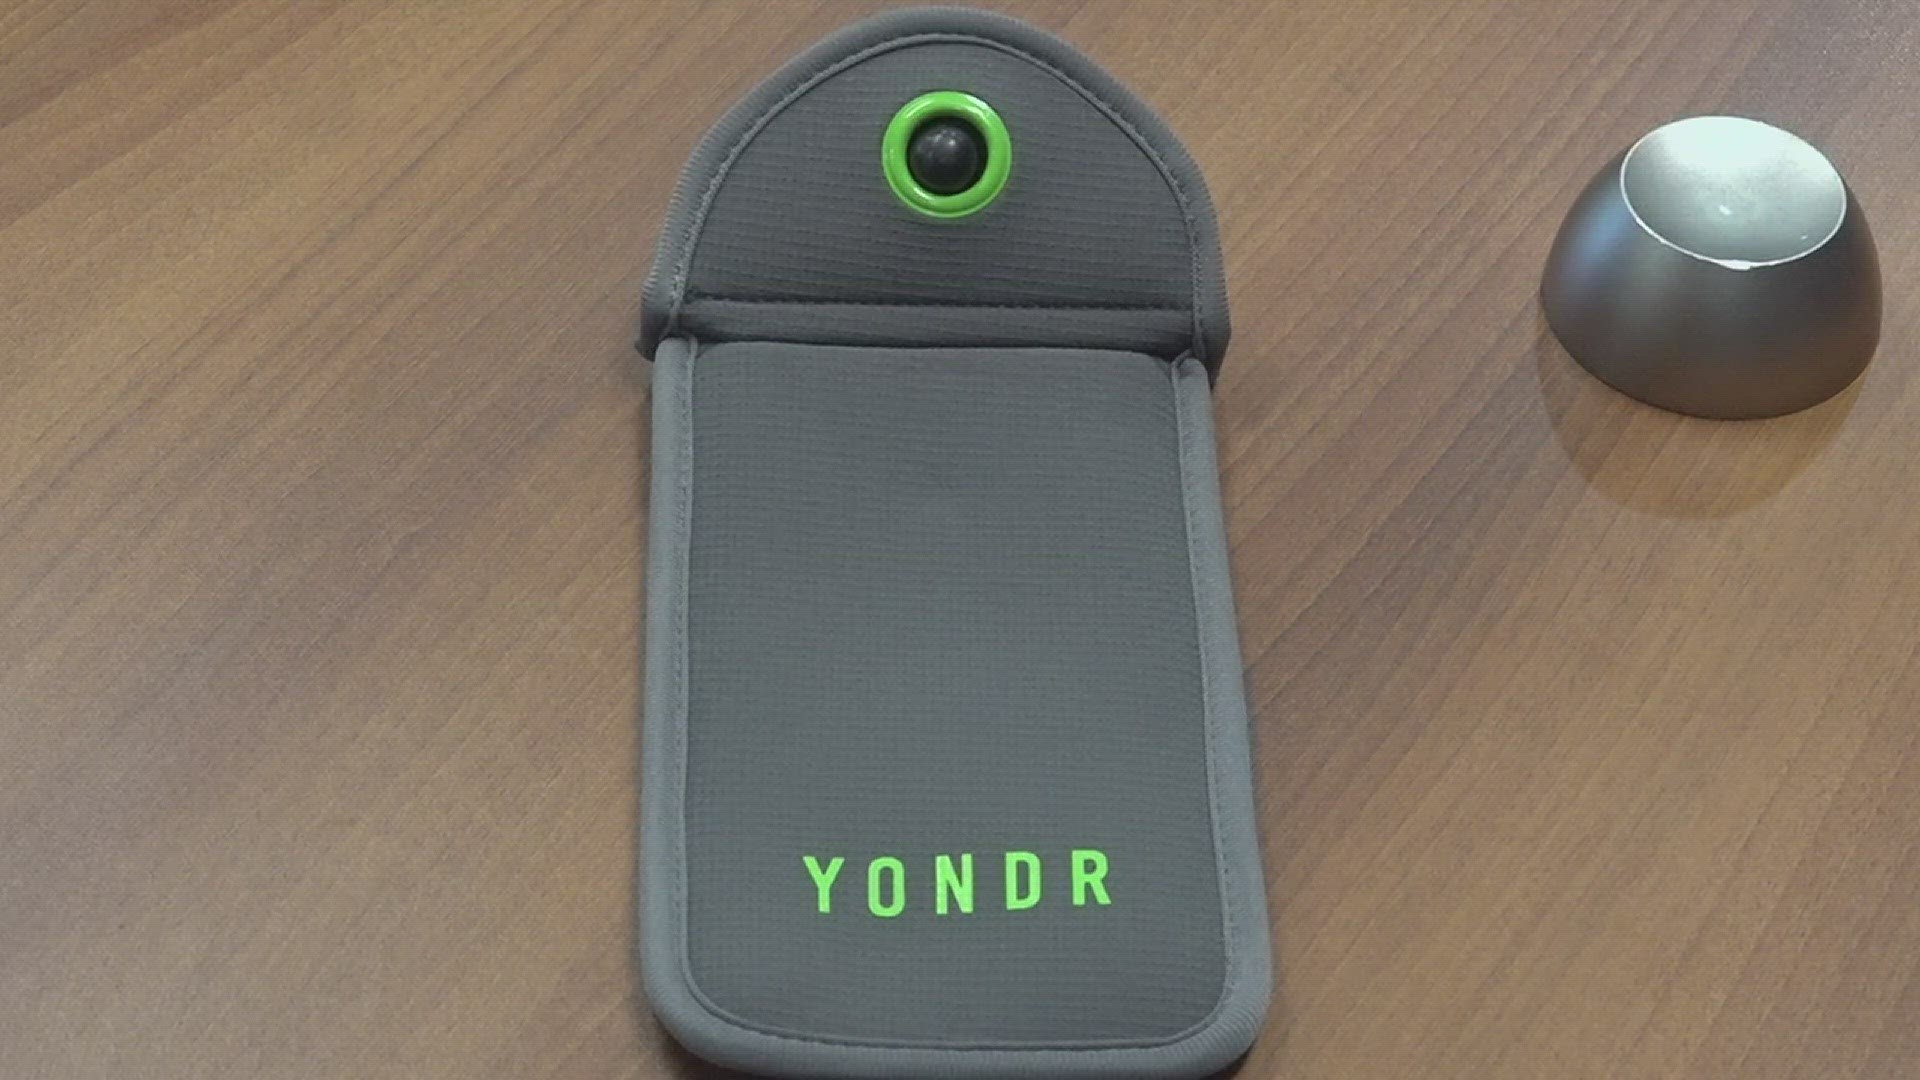 Woodville ISD limits cell phone use with Yondr pouches | 12newsnow.com